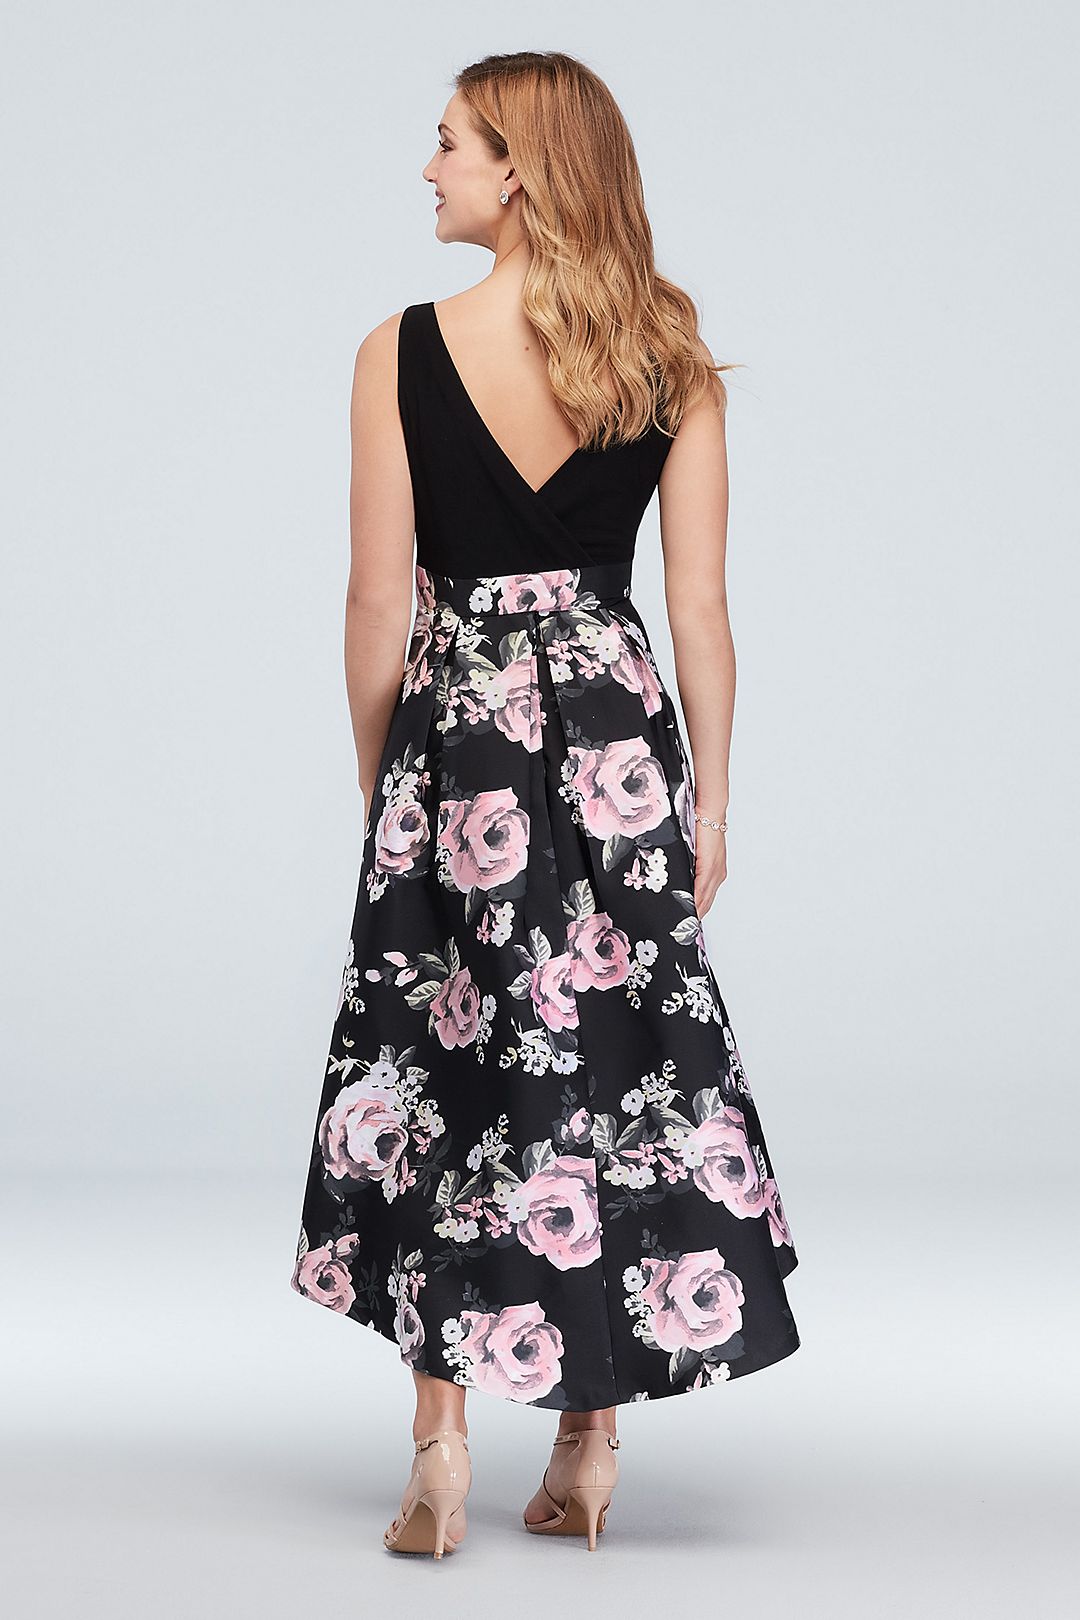 Boat Neck Floral High-Low Ball Gown with Bow Image 2